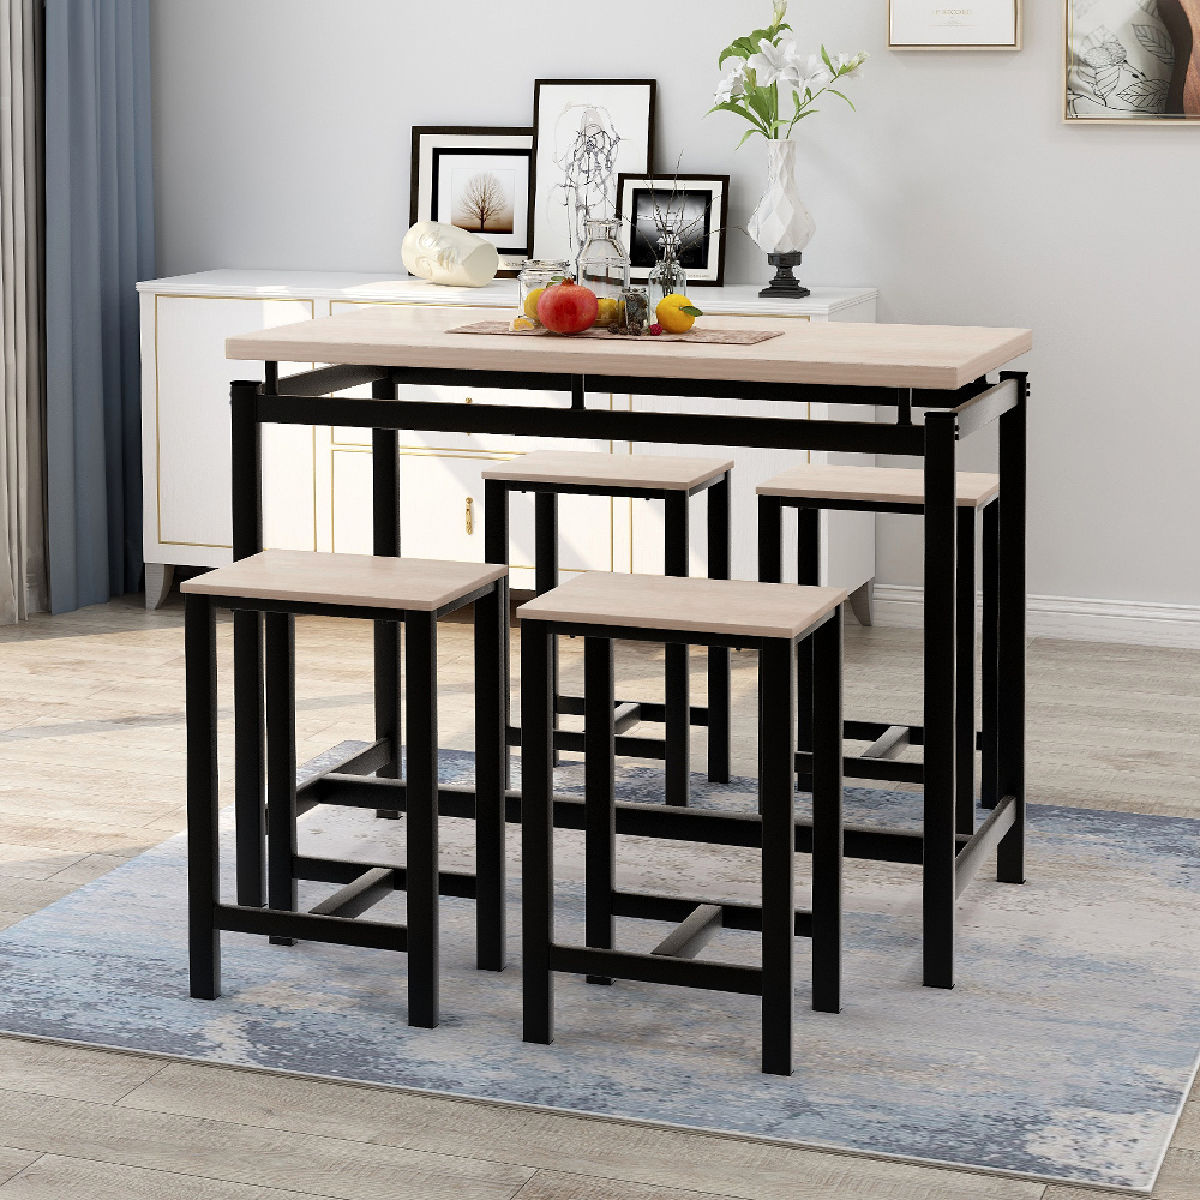 Euroco 5-Piece Dining Set Wood and Metal Pub Table